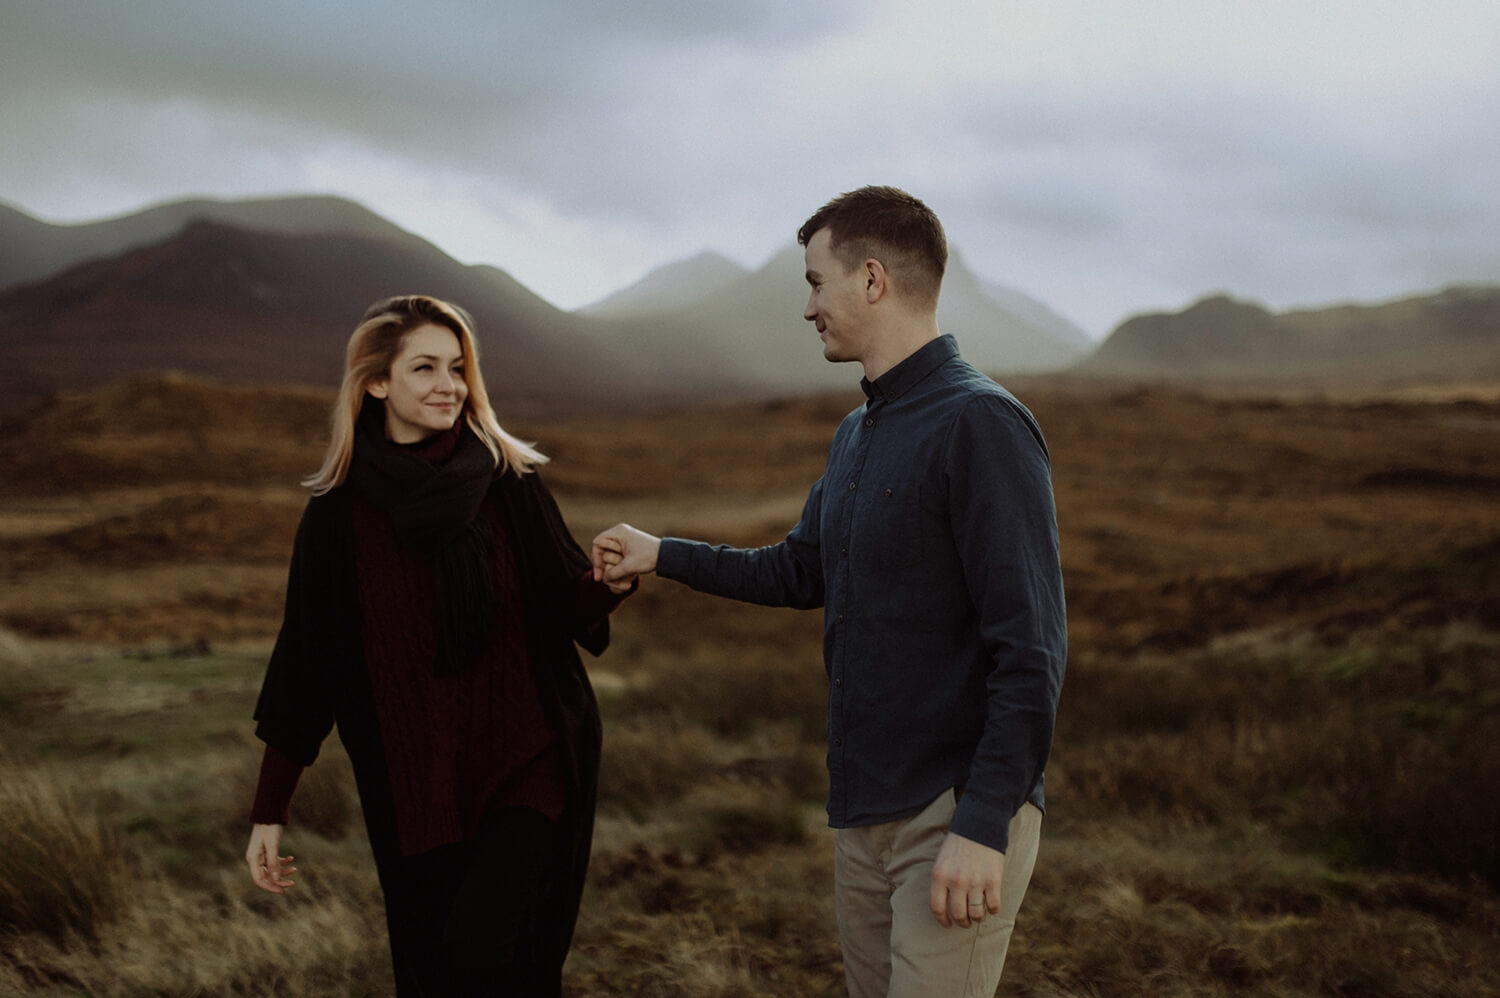 Hand in hand in the Scottish Highlands.